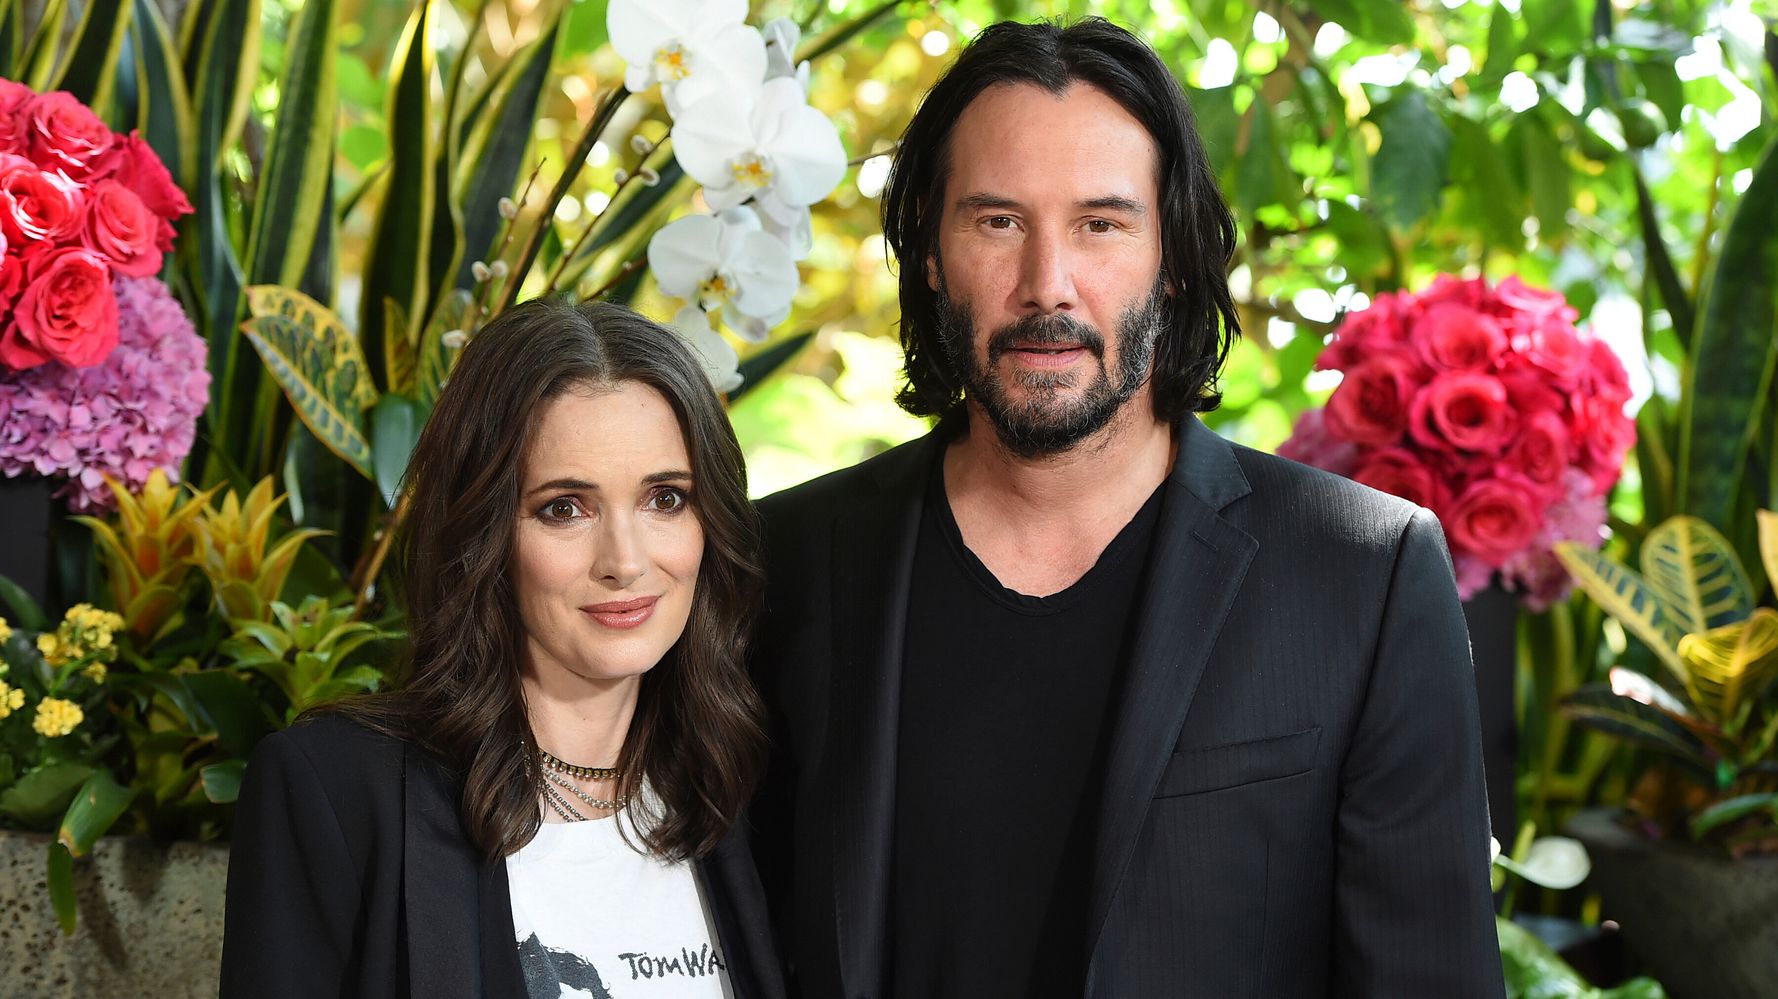 Keanu Reeves Says He’s Been Married To Winona Ryder For Almost 30 Years